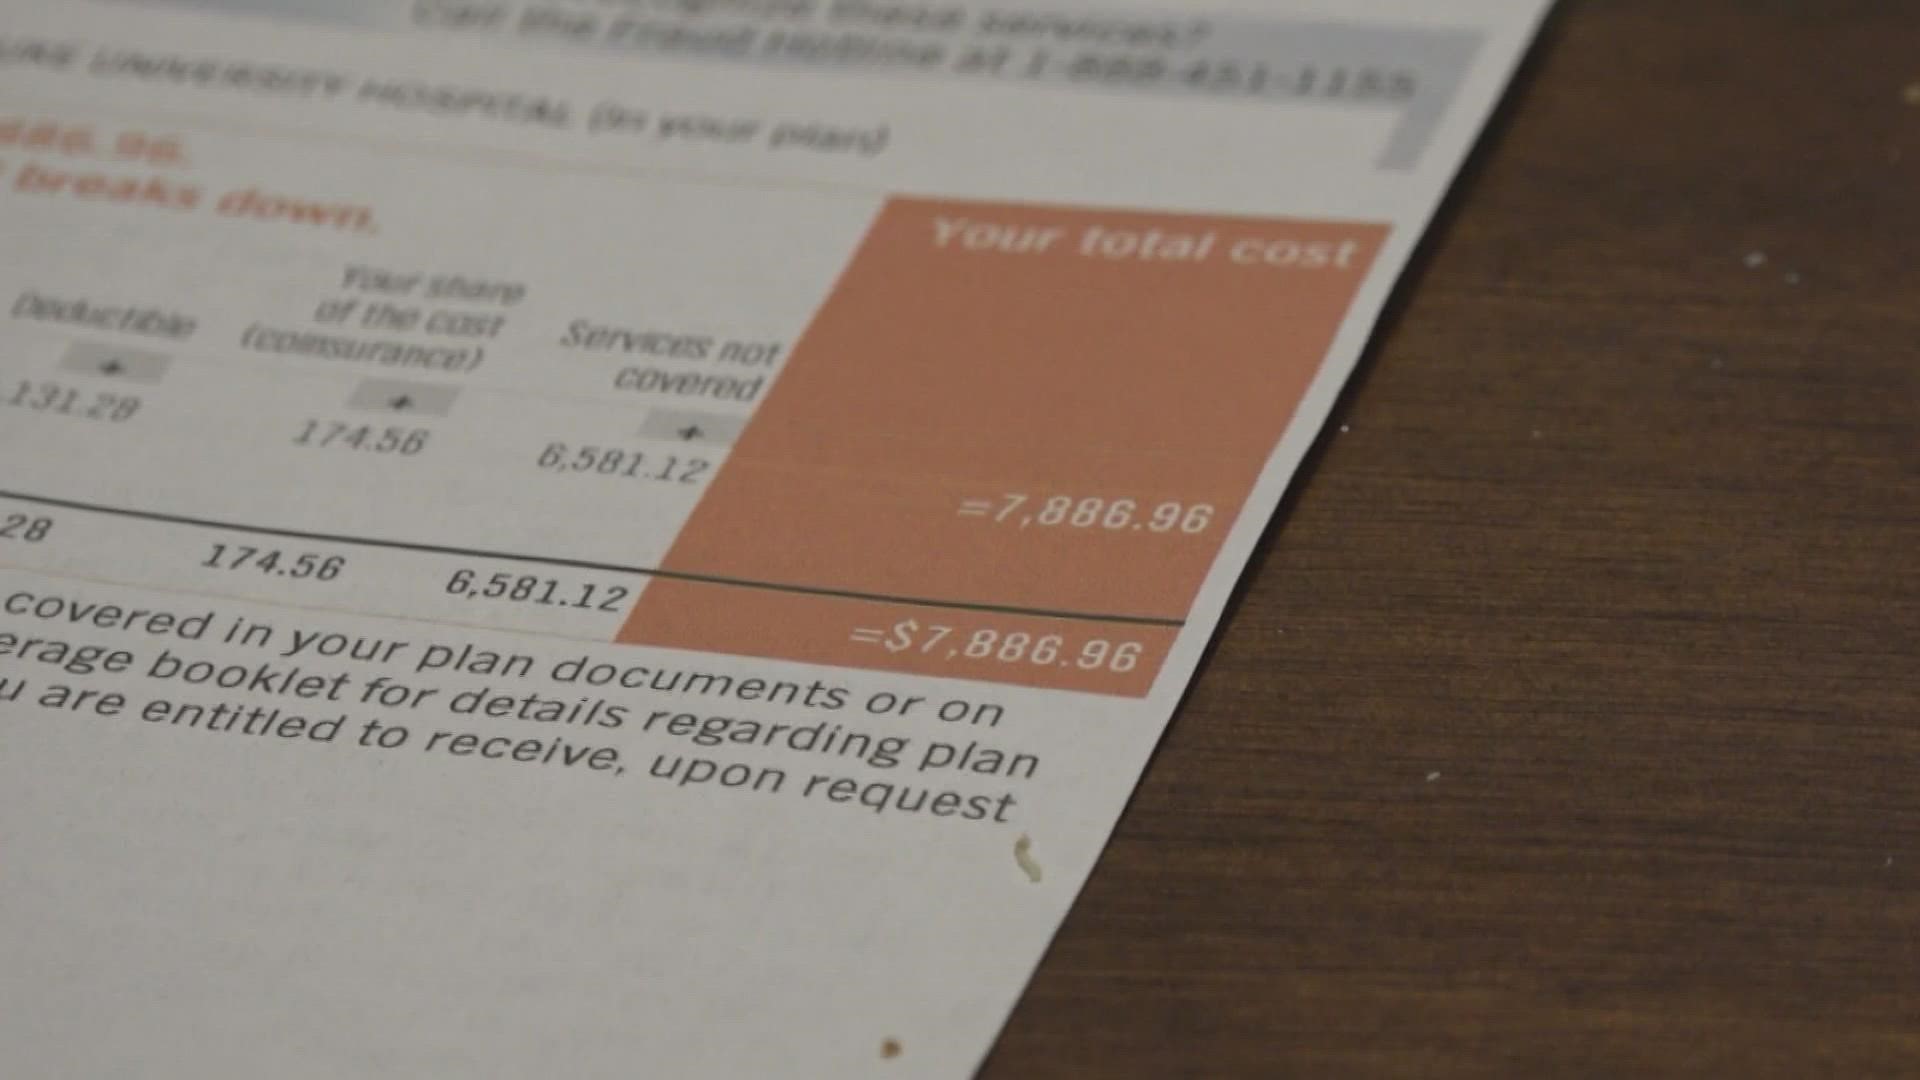 One Greensboro family had to put off a surgery procedure for months to resolve an $8,000 medical bill.